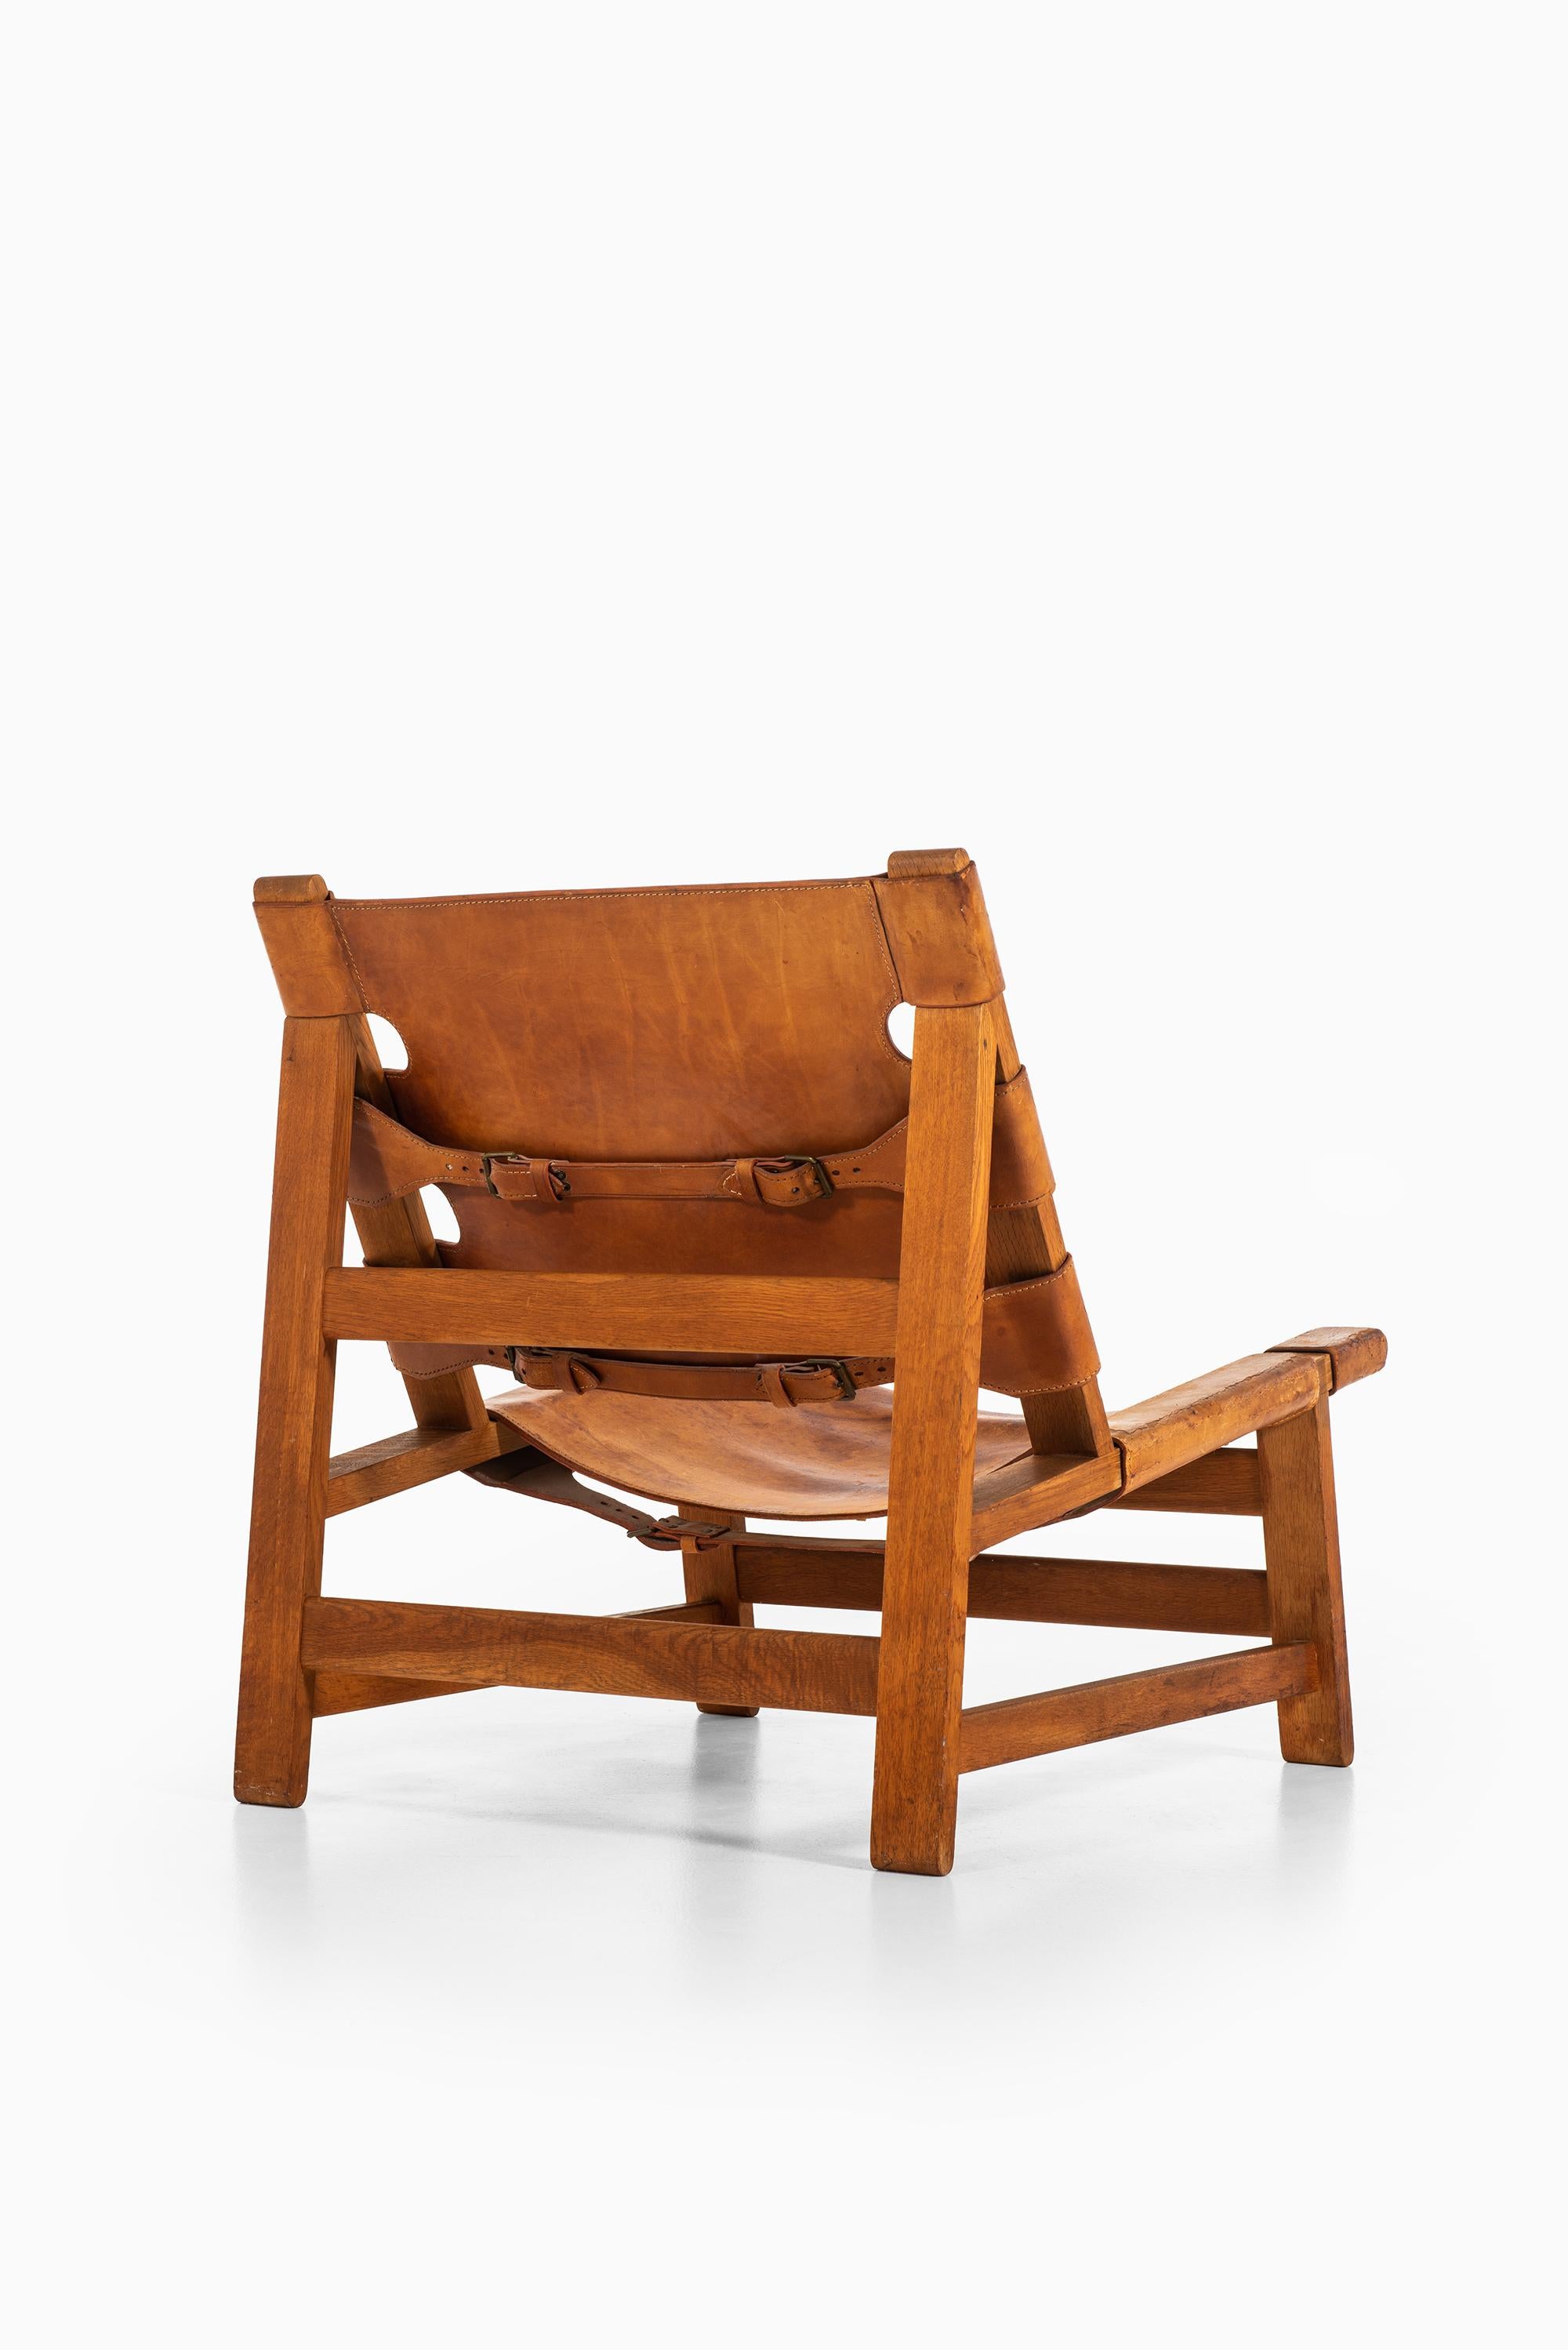 Leather Børge Mogensen Hunting Easy Chair Model 2224 by Fredericia Stolefabrik